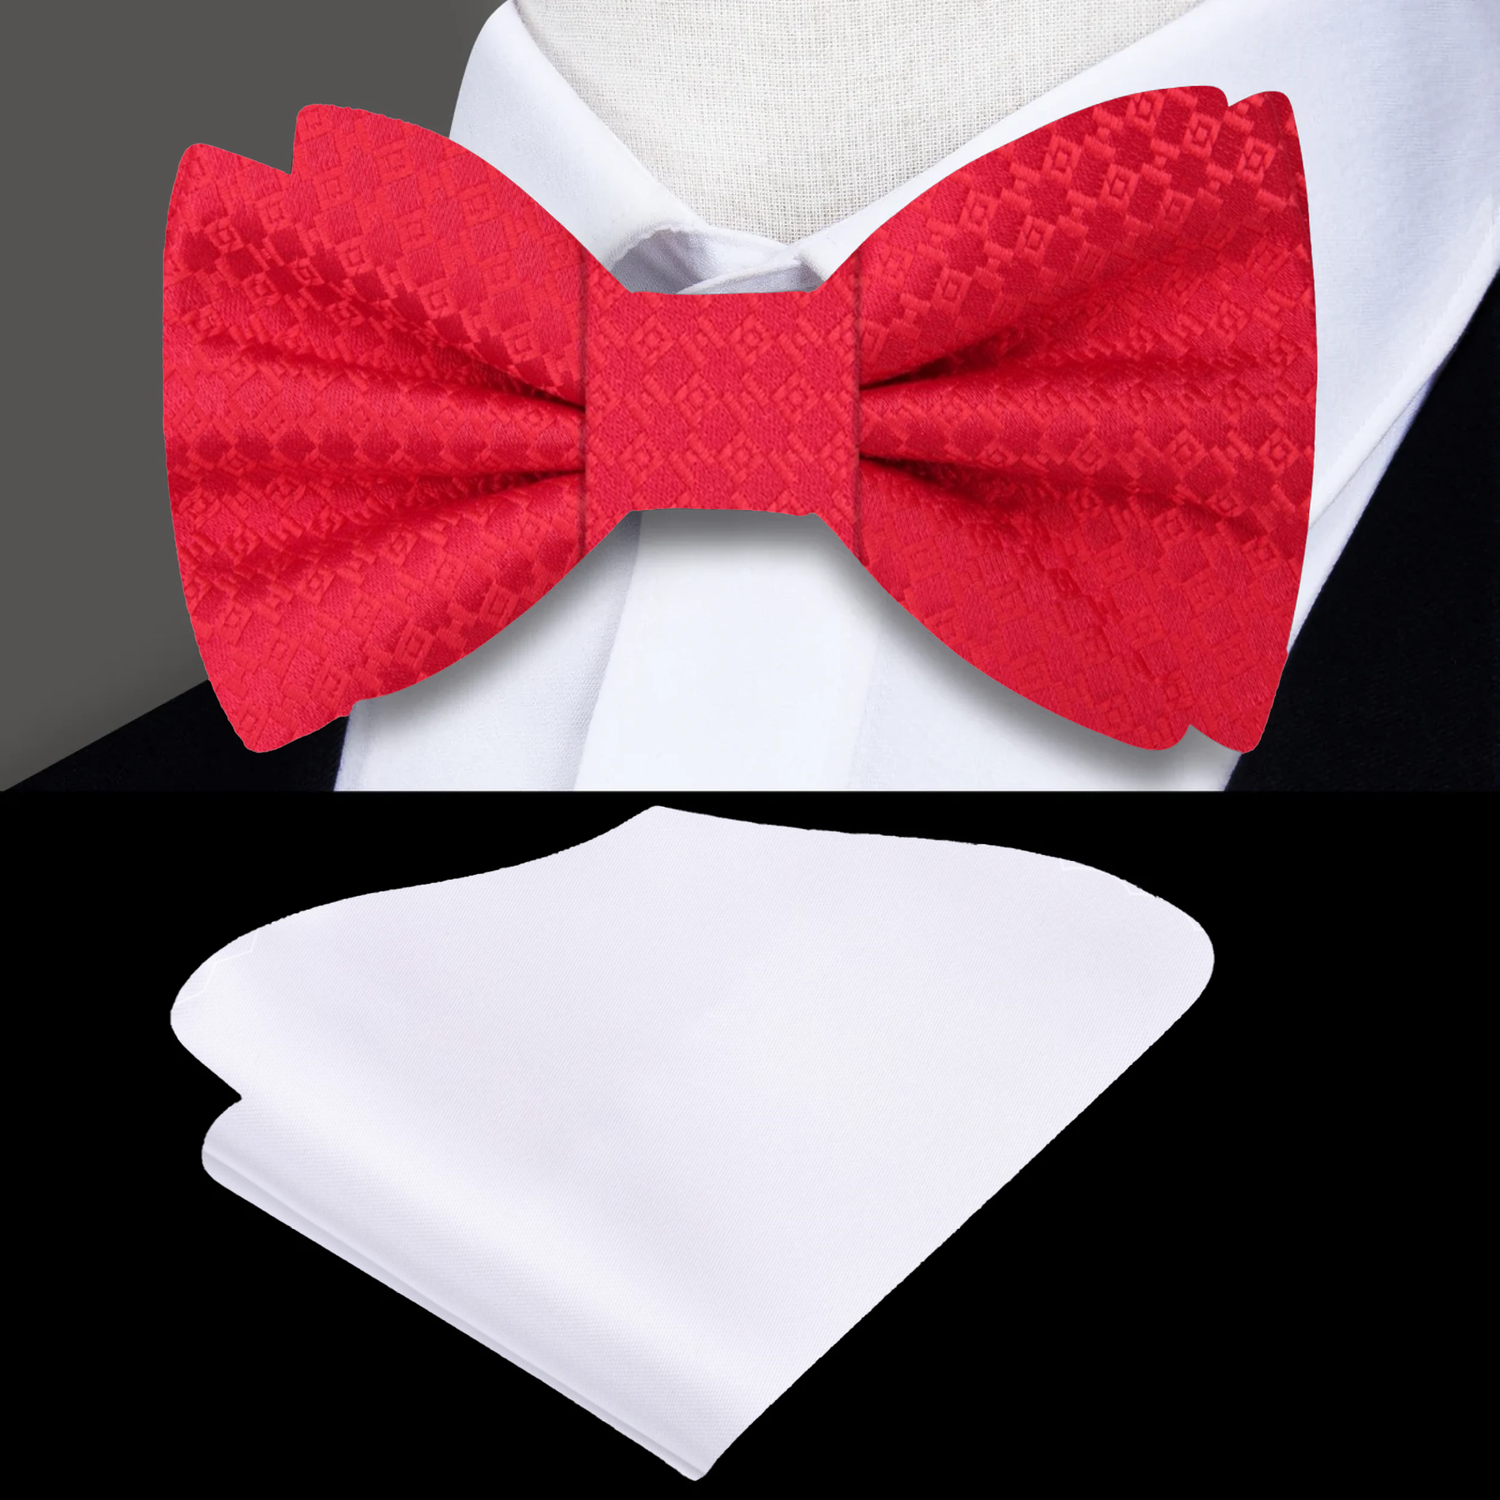 Red Geometric Bow Tie and White Pocket Square